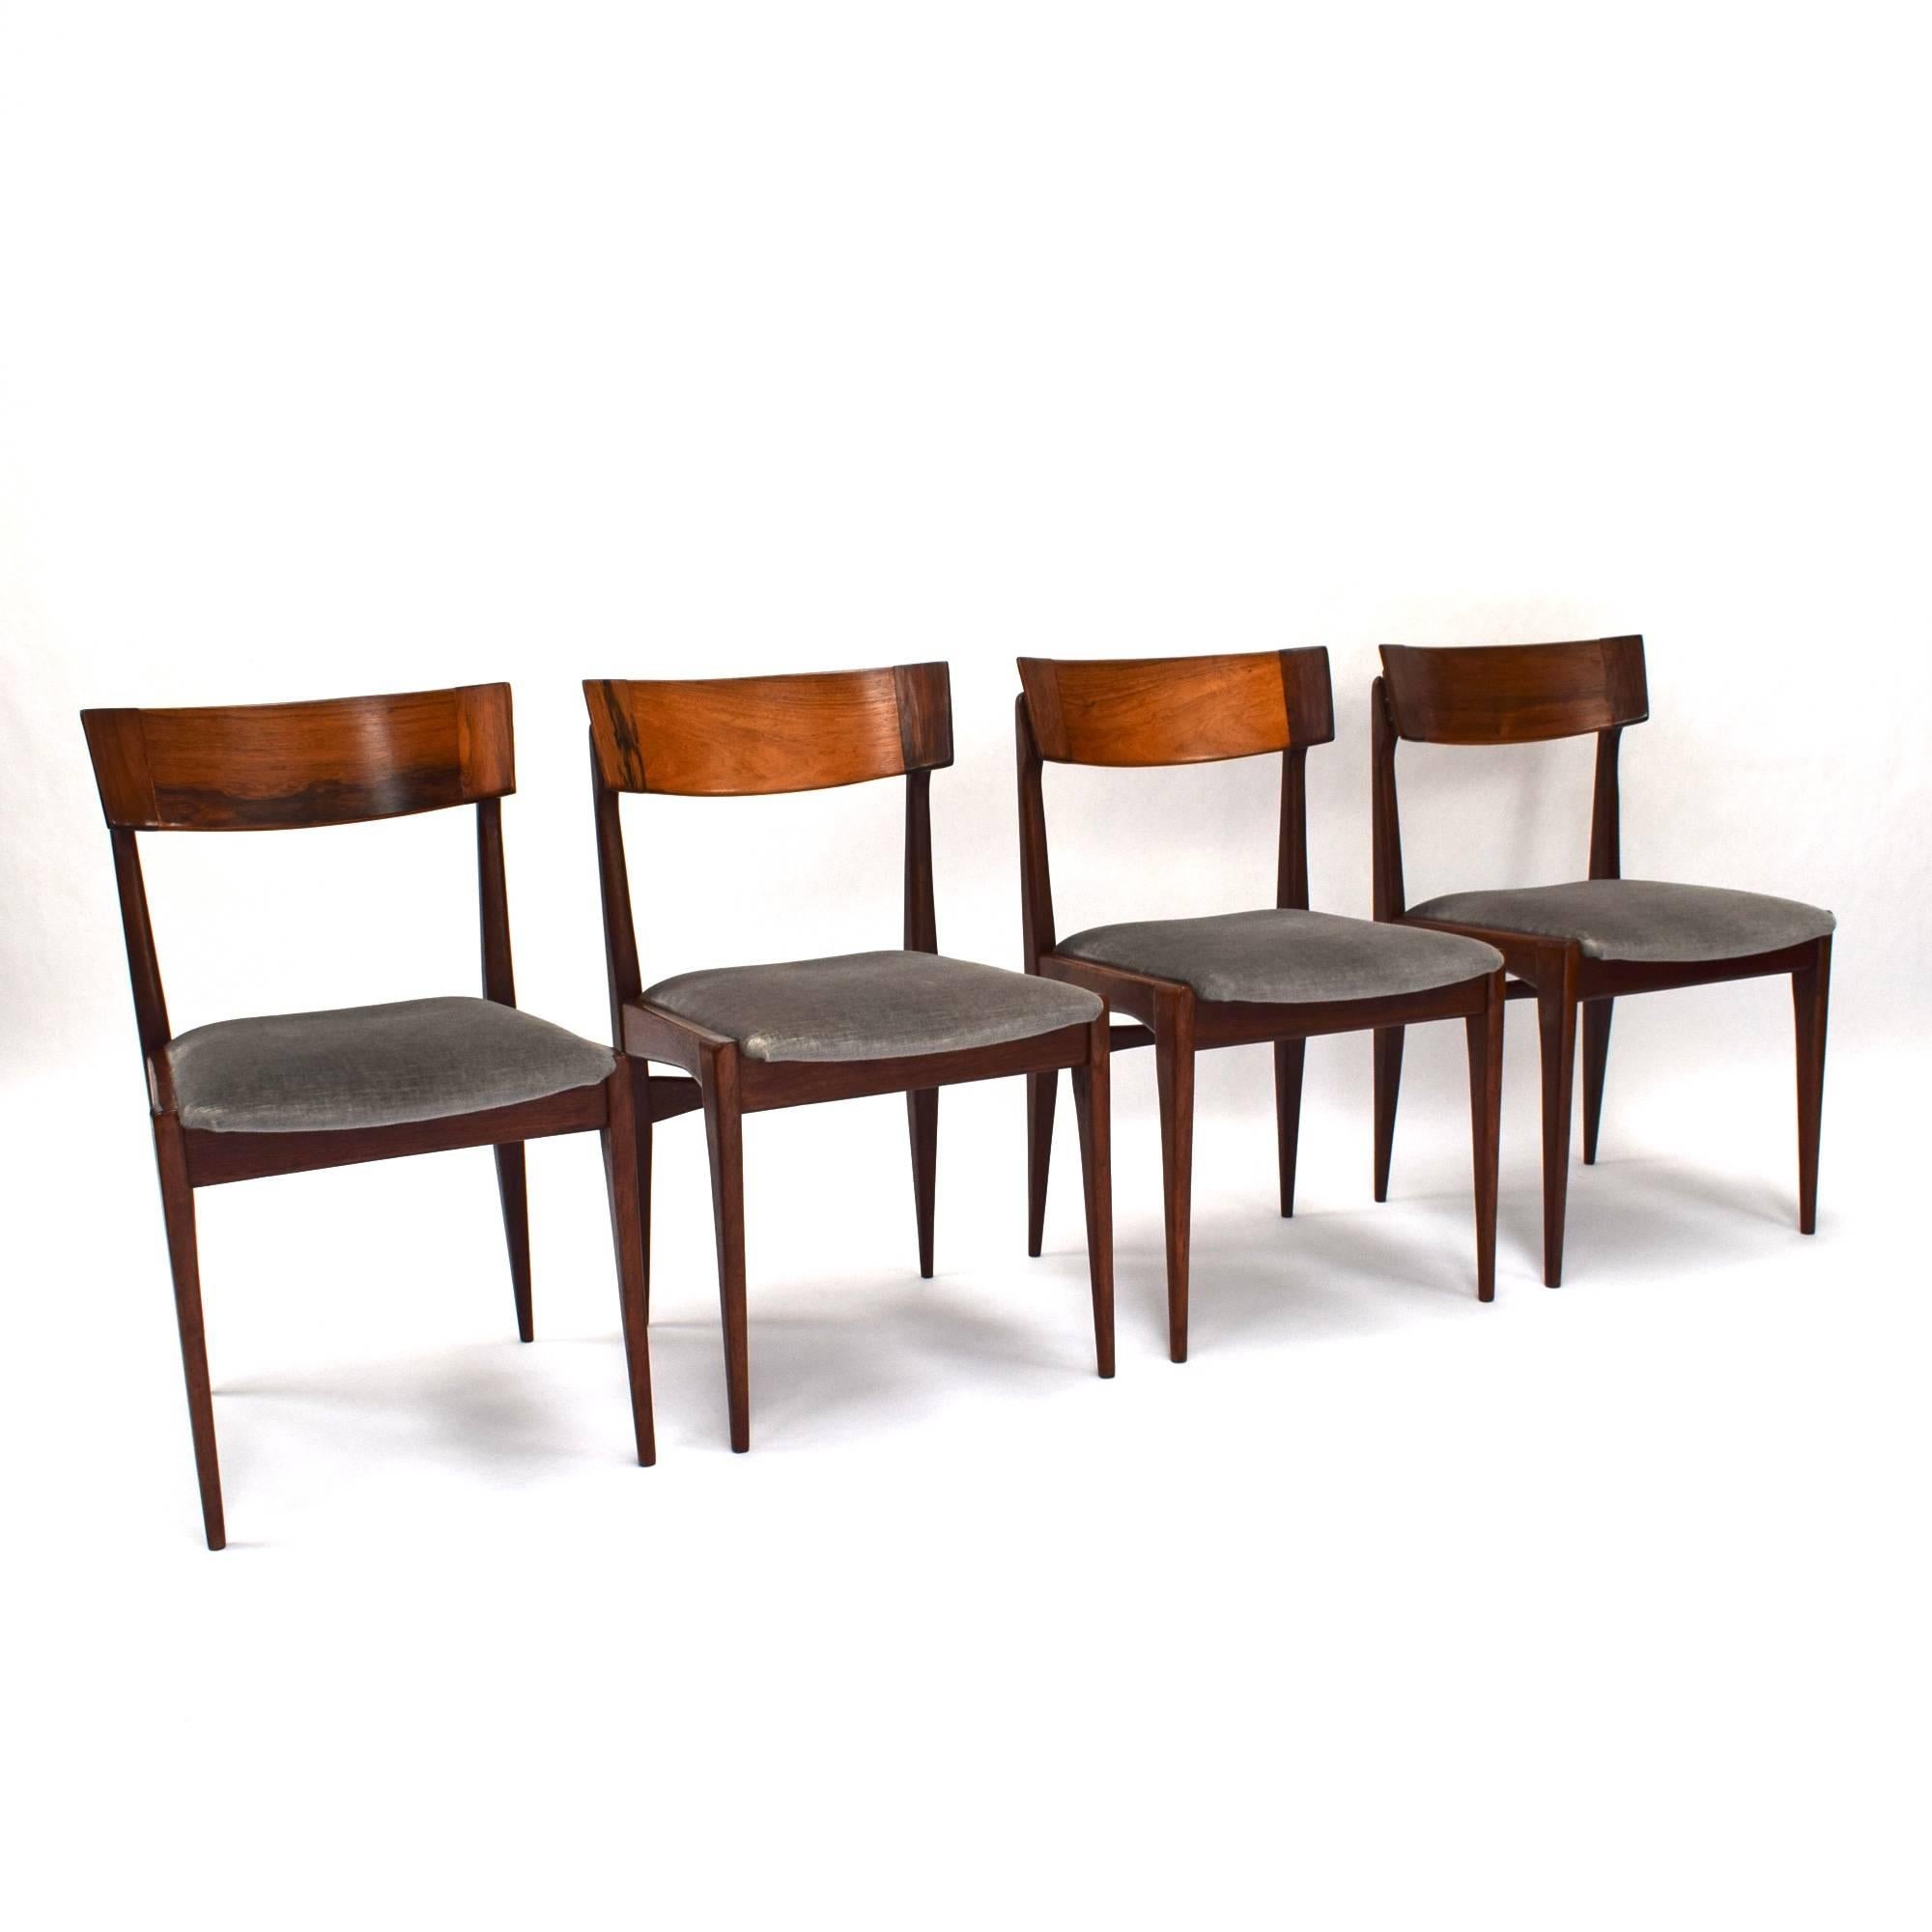 Designer: Unknown

Manufacturer: Unknown

Country: Scandinavia

Model: Dining chairs

Design period: 1950’s

Date of manufacturing: 1950-60’s

Size: W 46.5 x D 48 x H 80 seat height 46

Material: Brazilian rosewood (Rio palissander) /